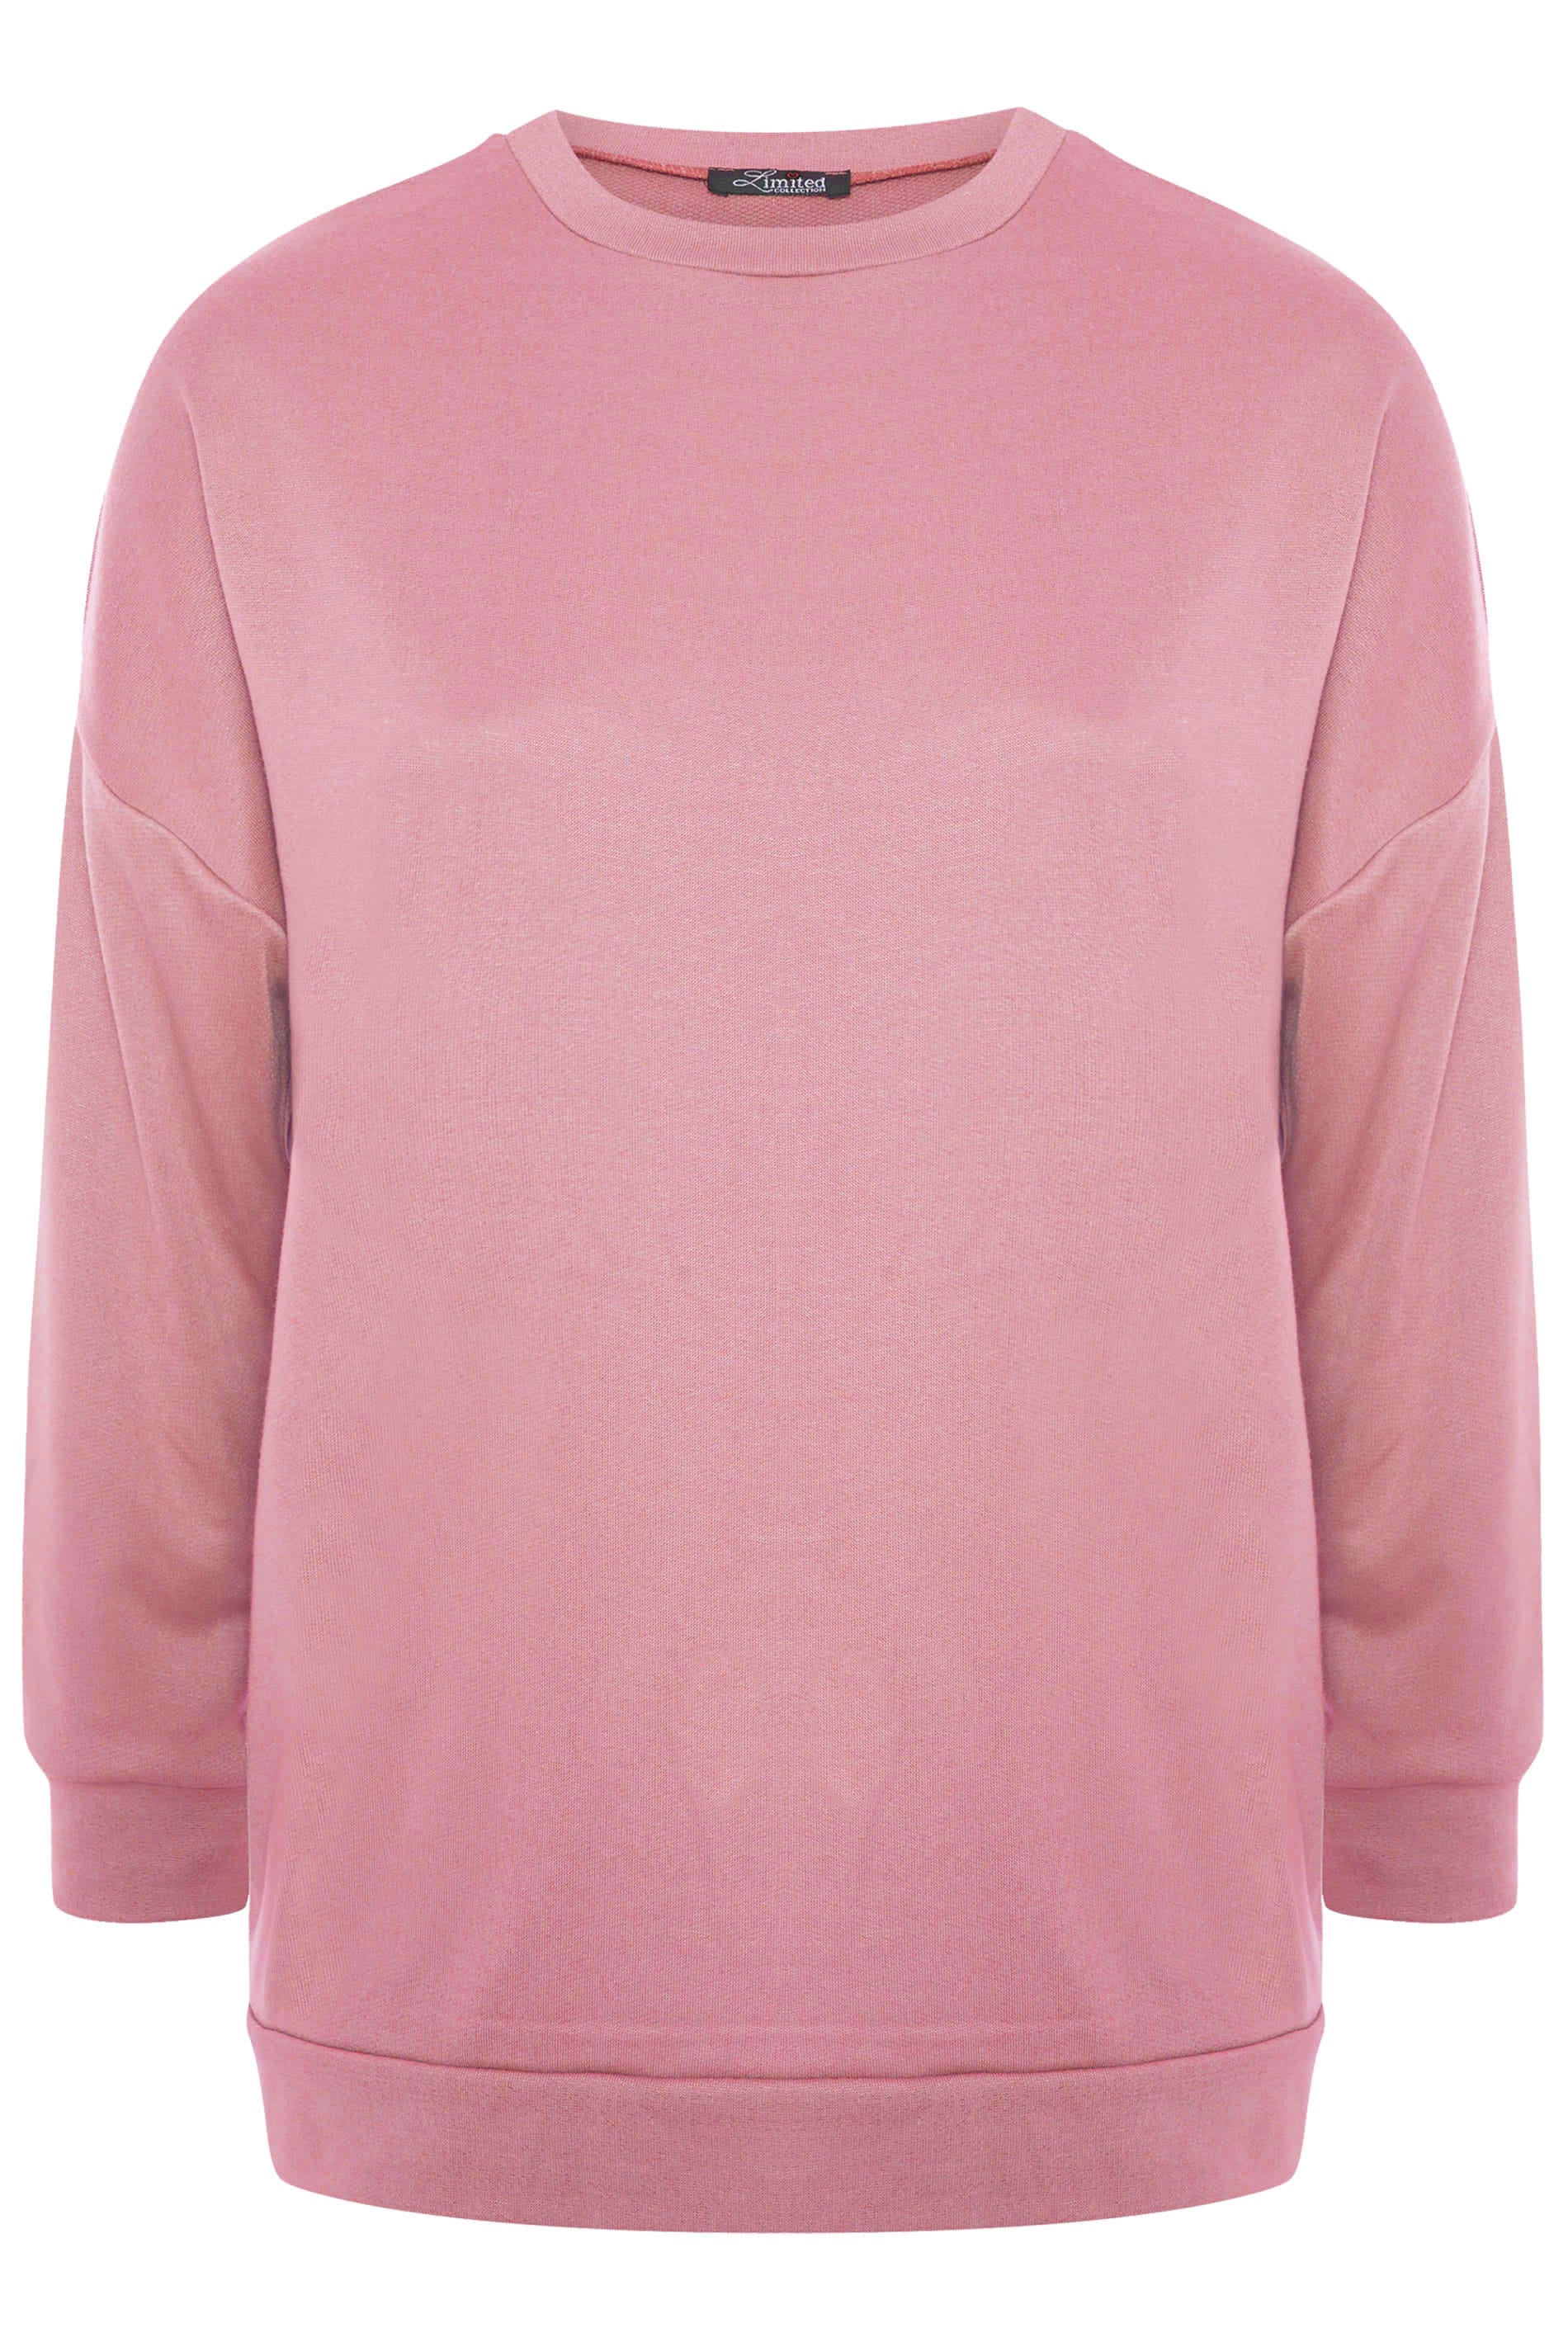 LIMITED COLLECTION Blush Pink Sweatshirt | Yours Clothing